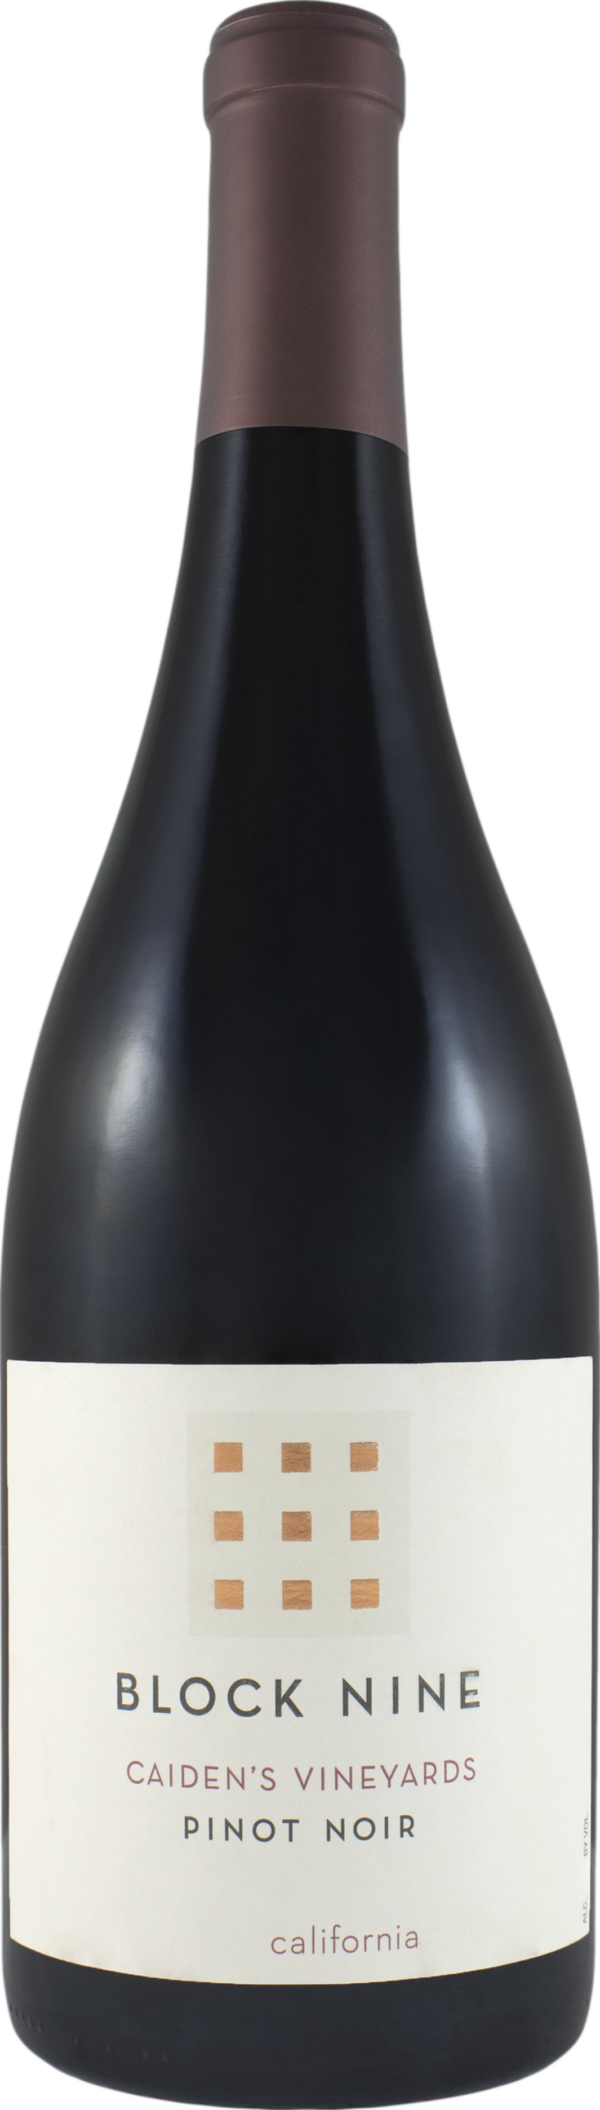 Product image of Block Nine Caiden's Vineyard Pinot Noir 2020 from 8wines